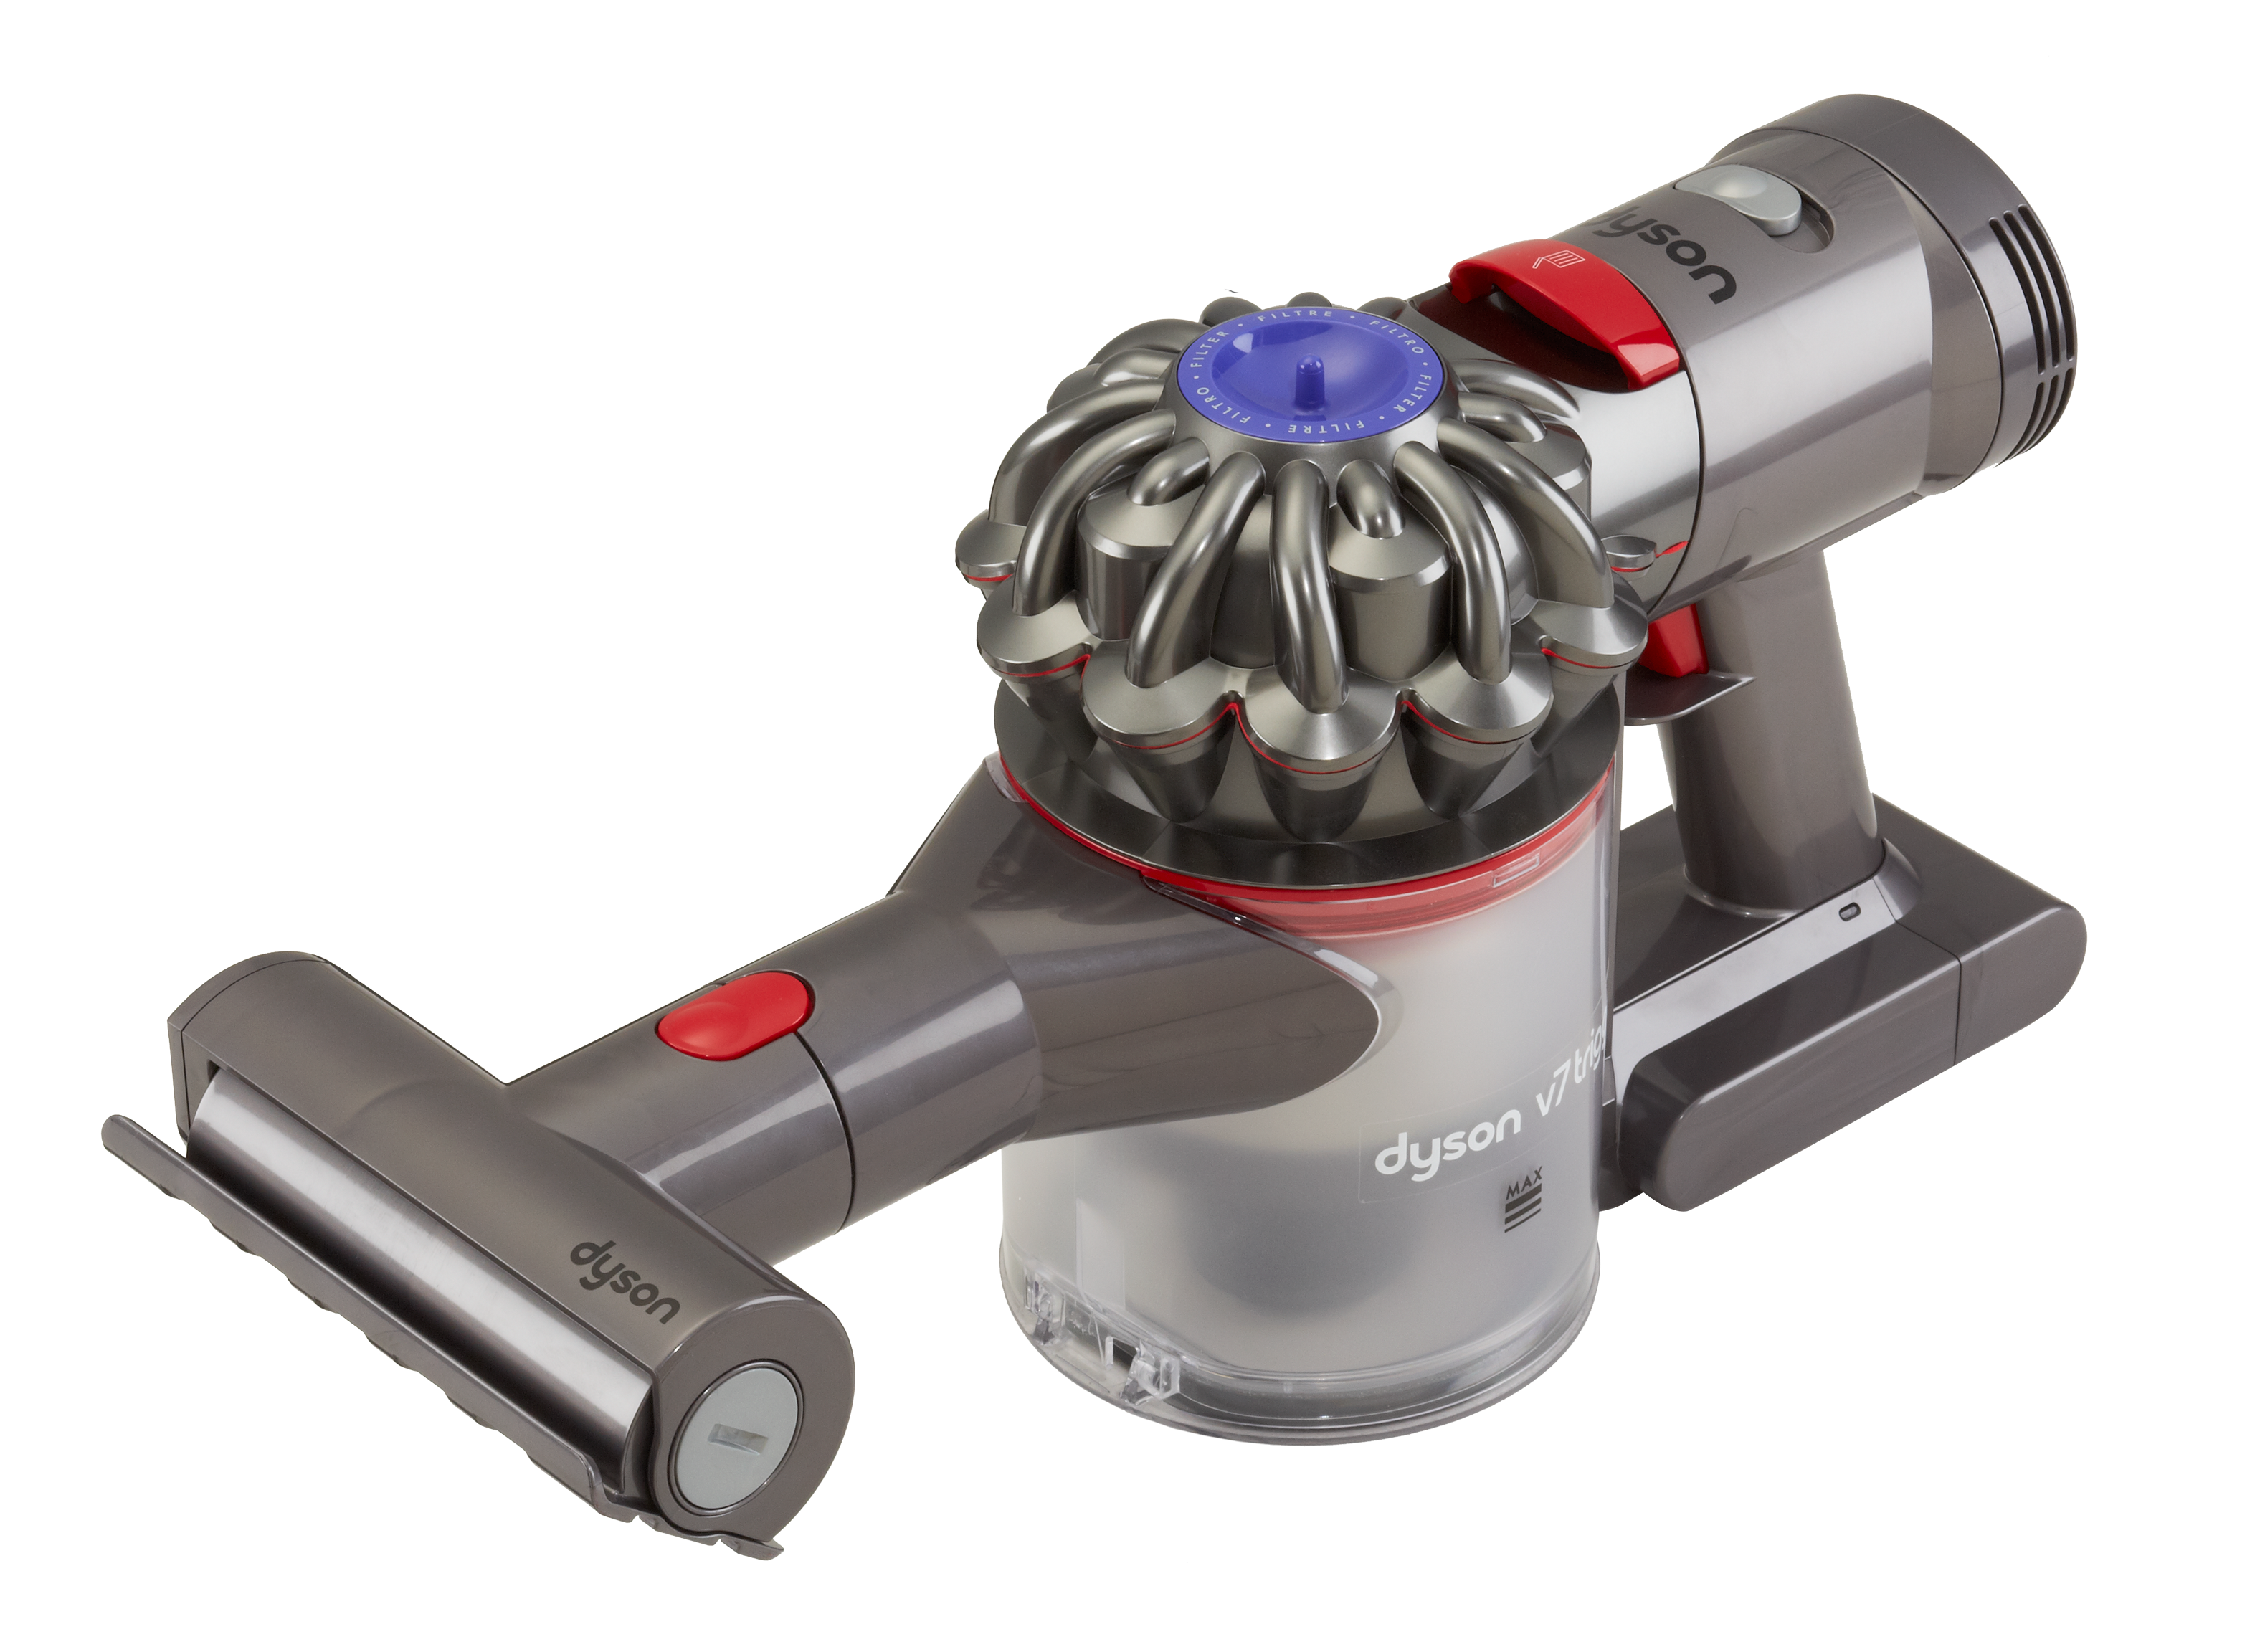 Dyson V7 Trigger Vacuum Cleaner Review   Consumer Reports